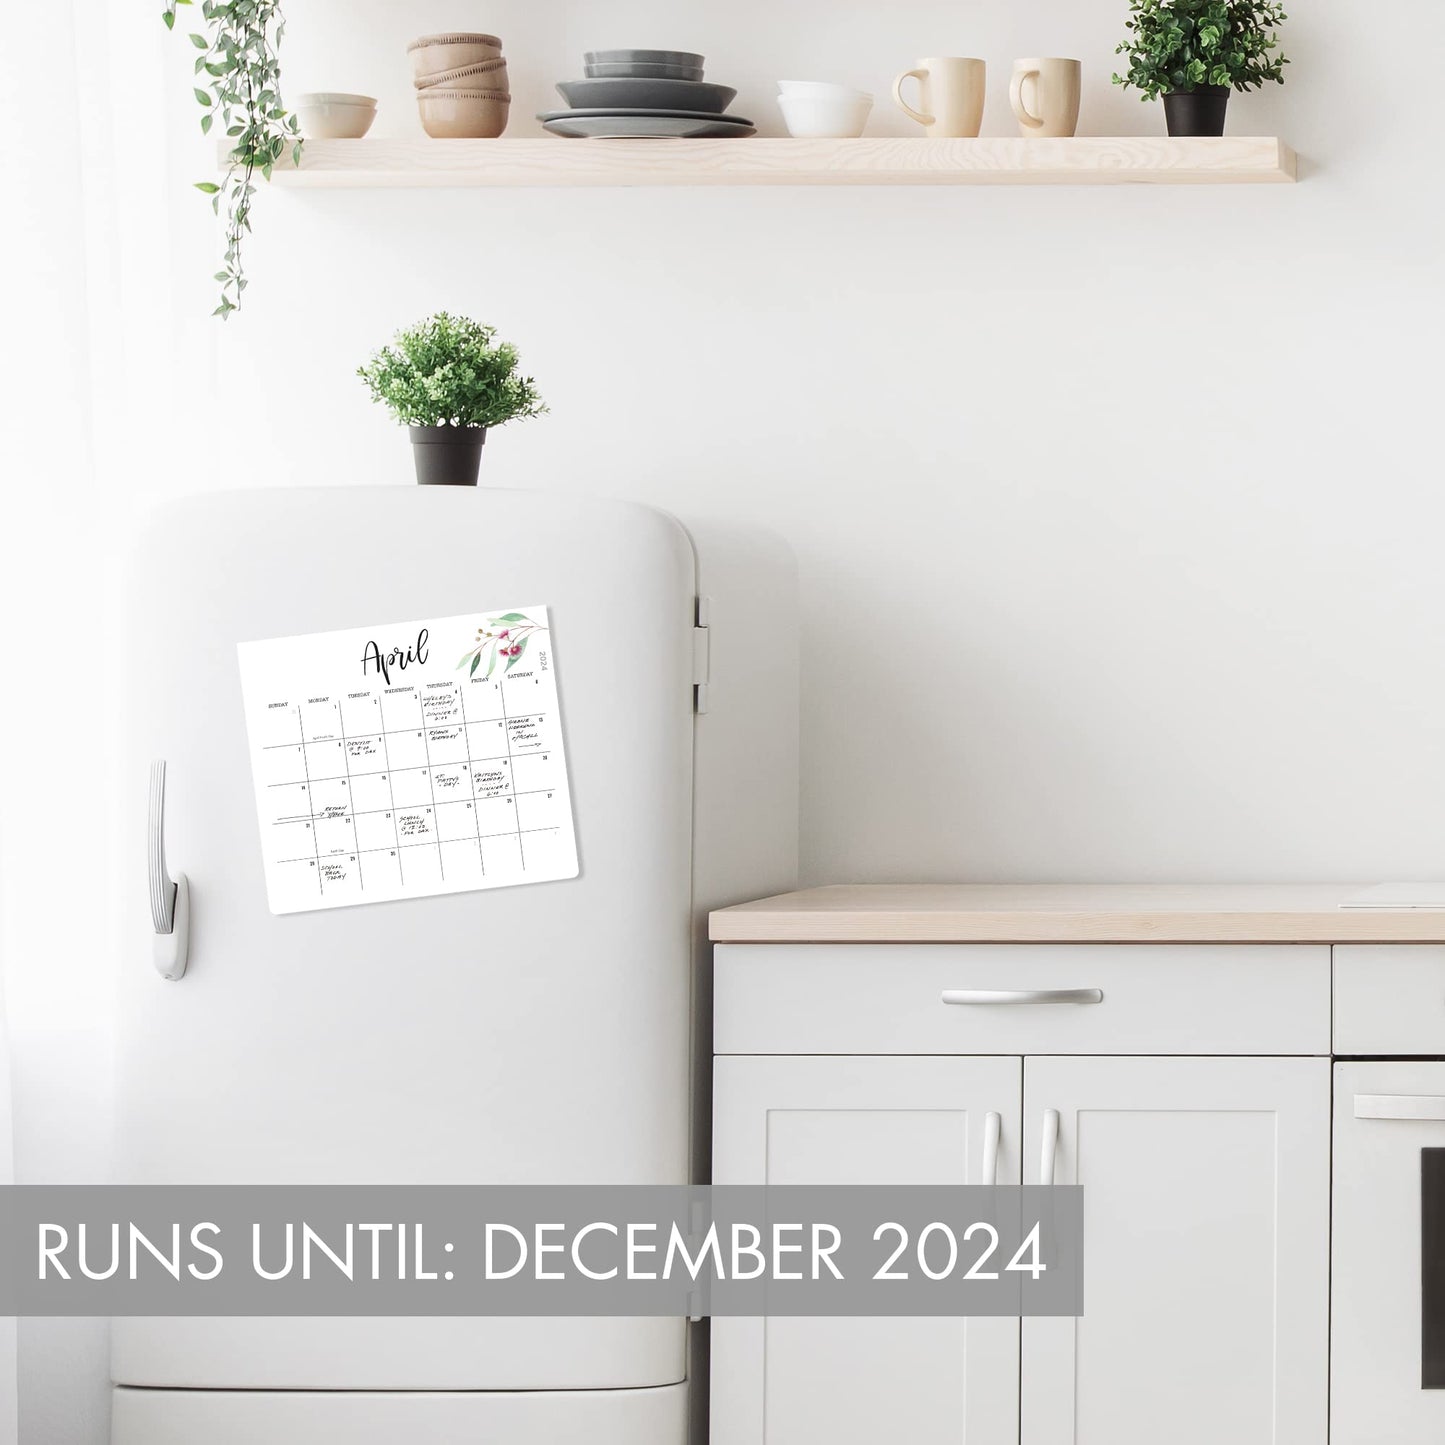 Beautiful 2024 Magnetic Calendar For Refrigerator - Incl. 2023 and Runs Until December 2024 - The Perfect Monthly Fridge Calendar for Easy Organizing